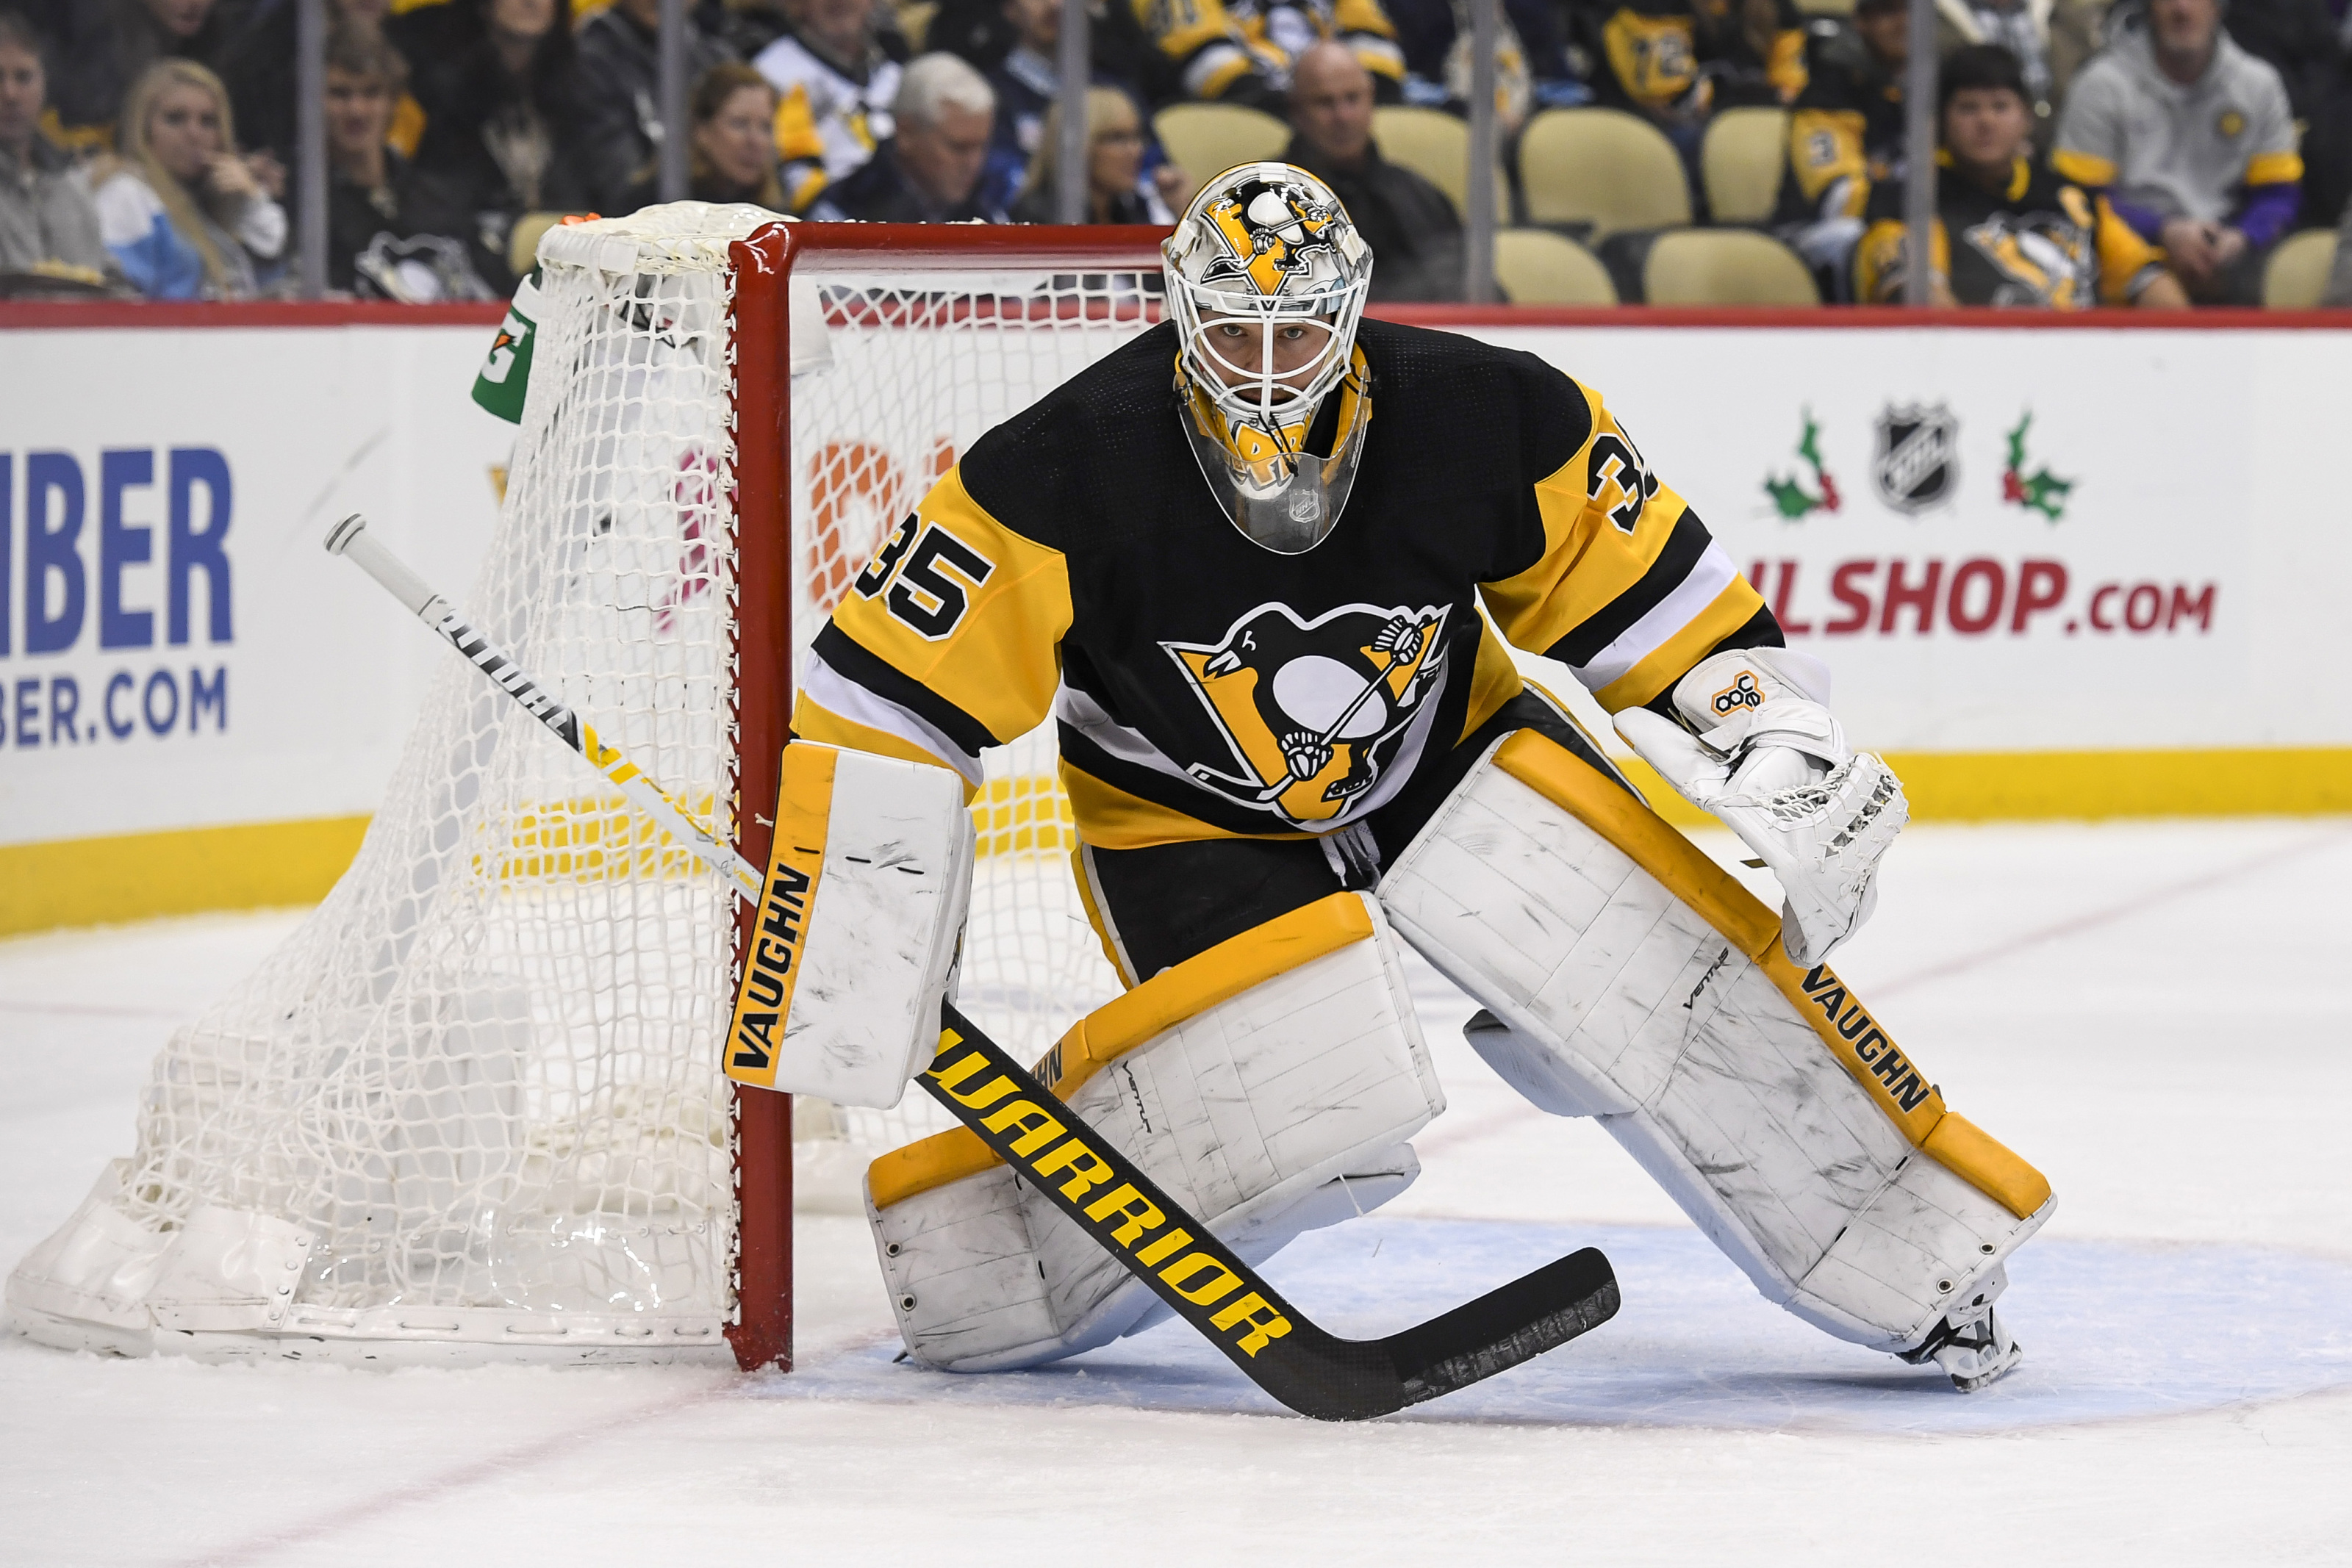 The Pittsburgh Penguins by the numbers: Tristan Jarry